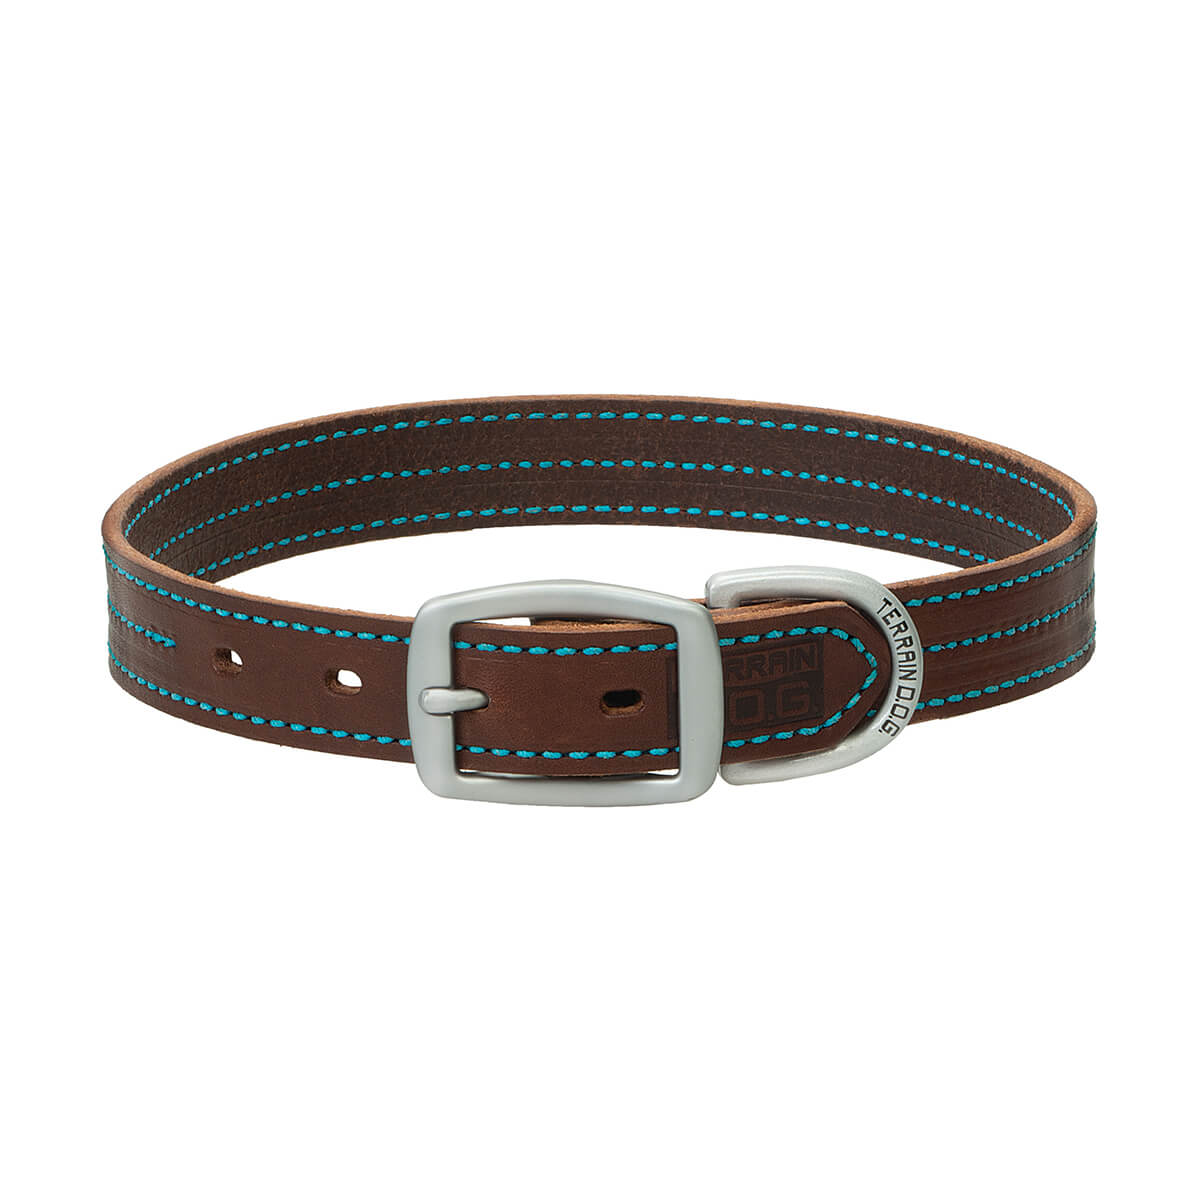 Terrain D.O.G.® Bridle Leather Dog Collar - 1-in x 23-in